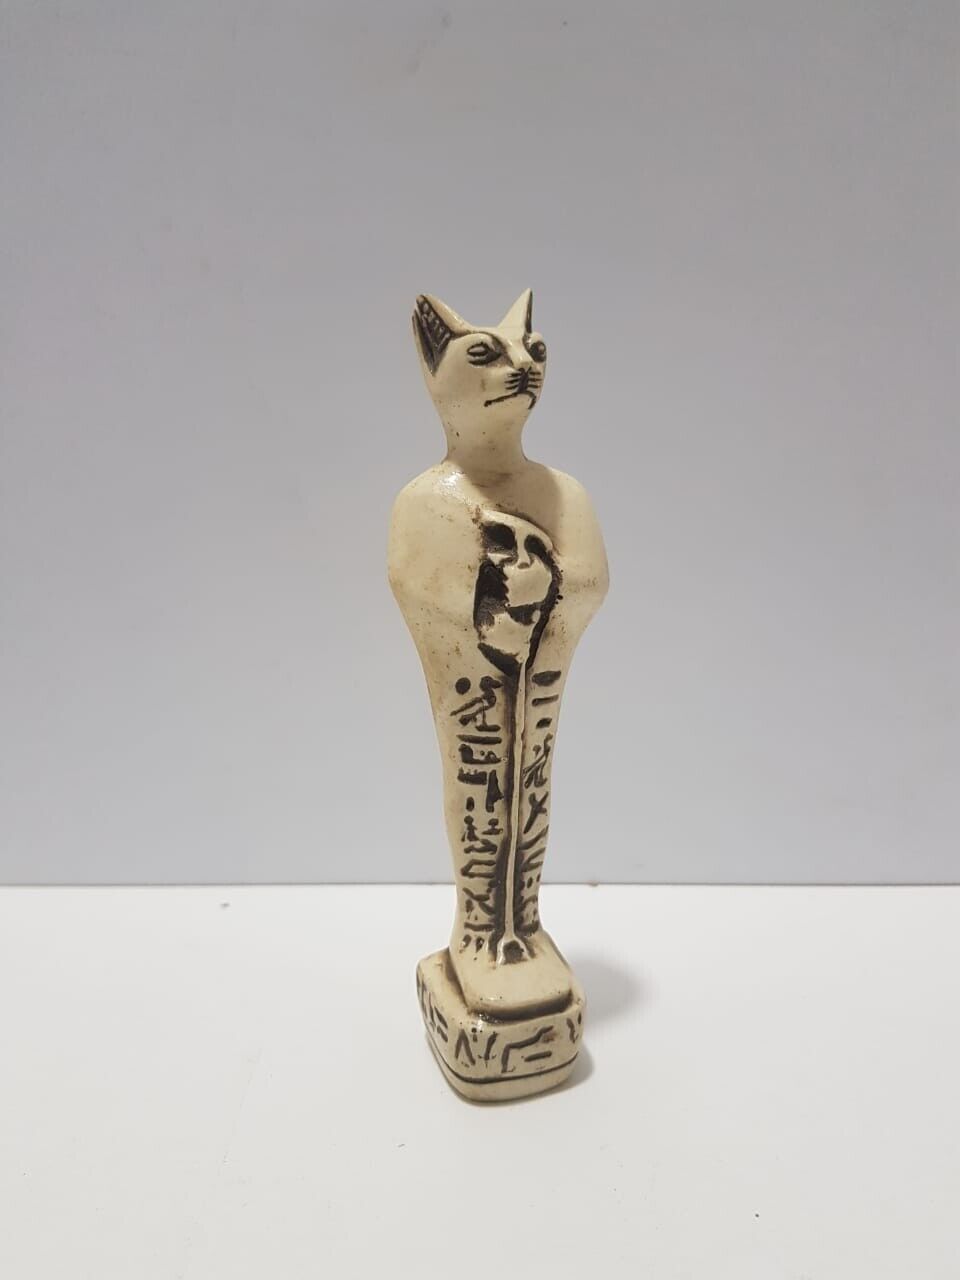 RARE PHARAONIC CAT BASTET STATUE MUSEUM - ANCIENT EGYPTIAN ANTHQUITIES BC